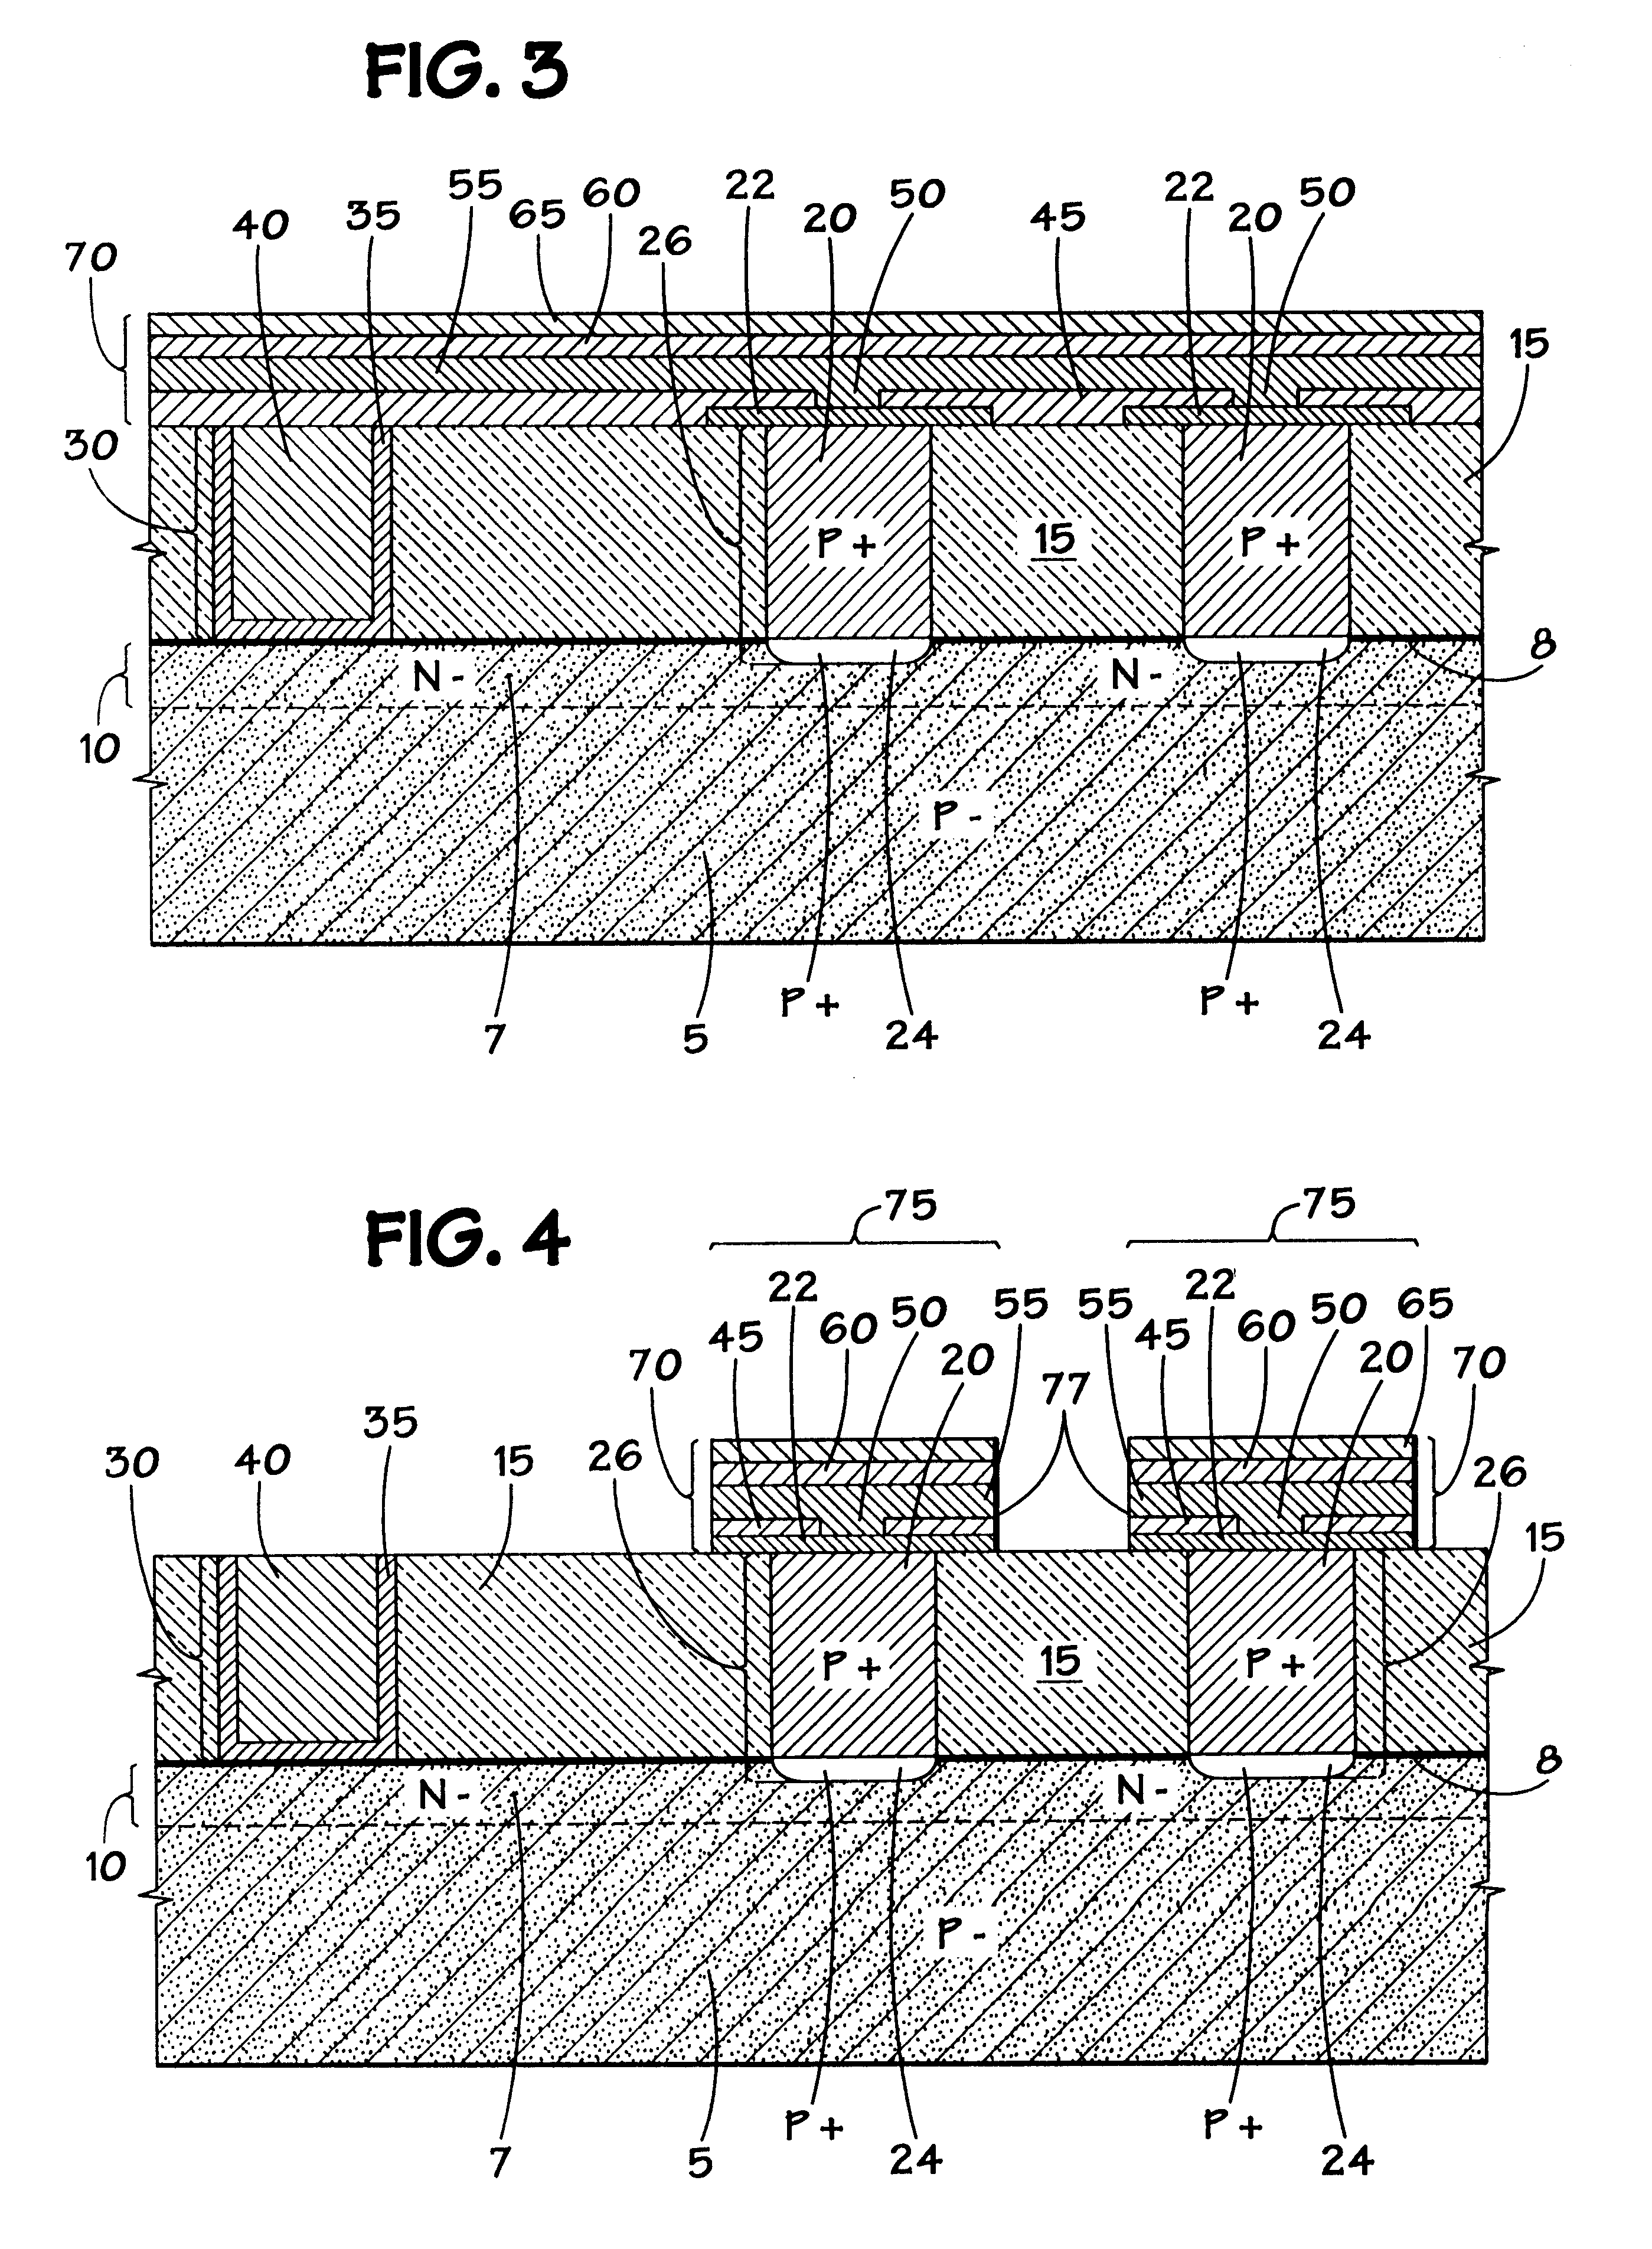 Memory cell incorporating a chalcogenide element and method of making same